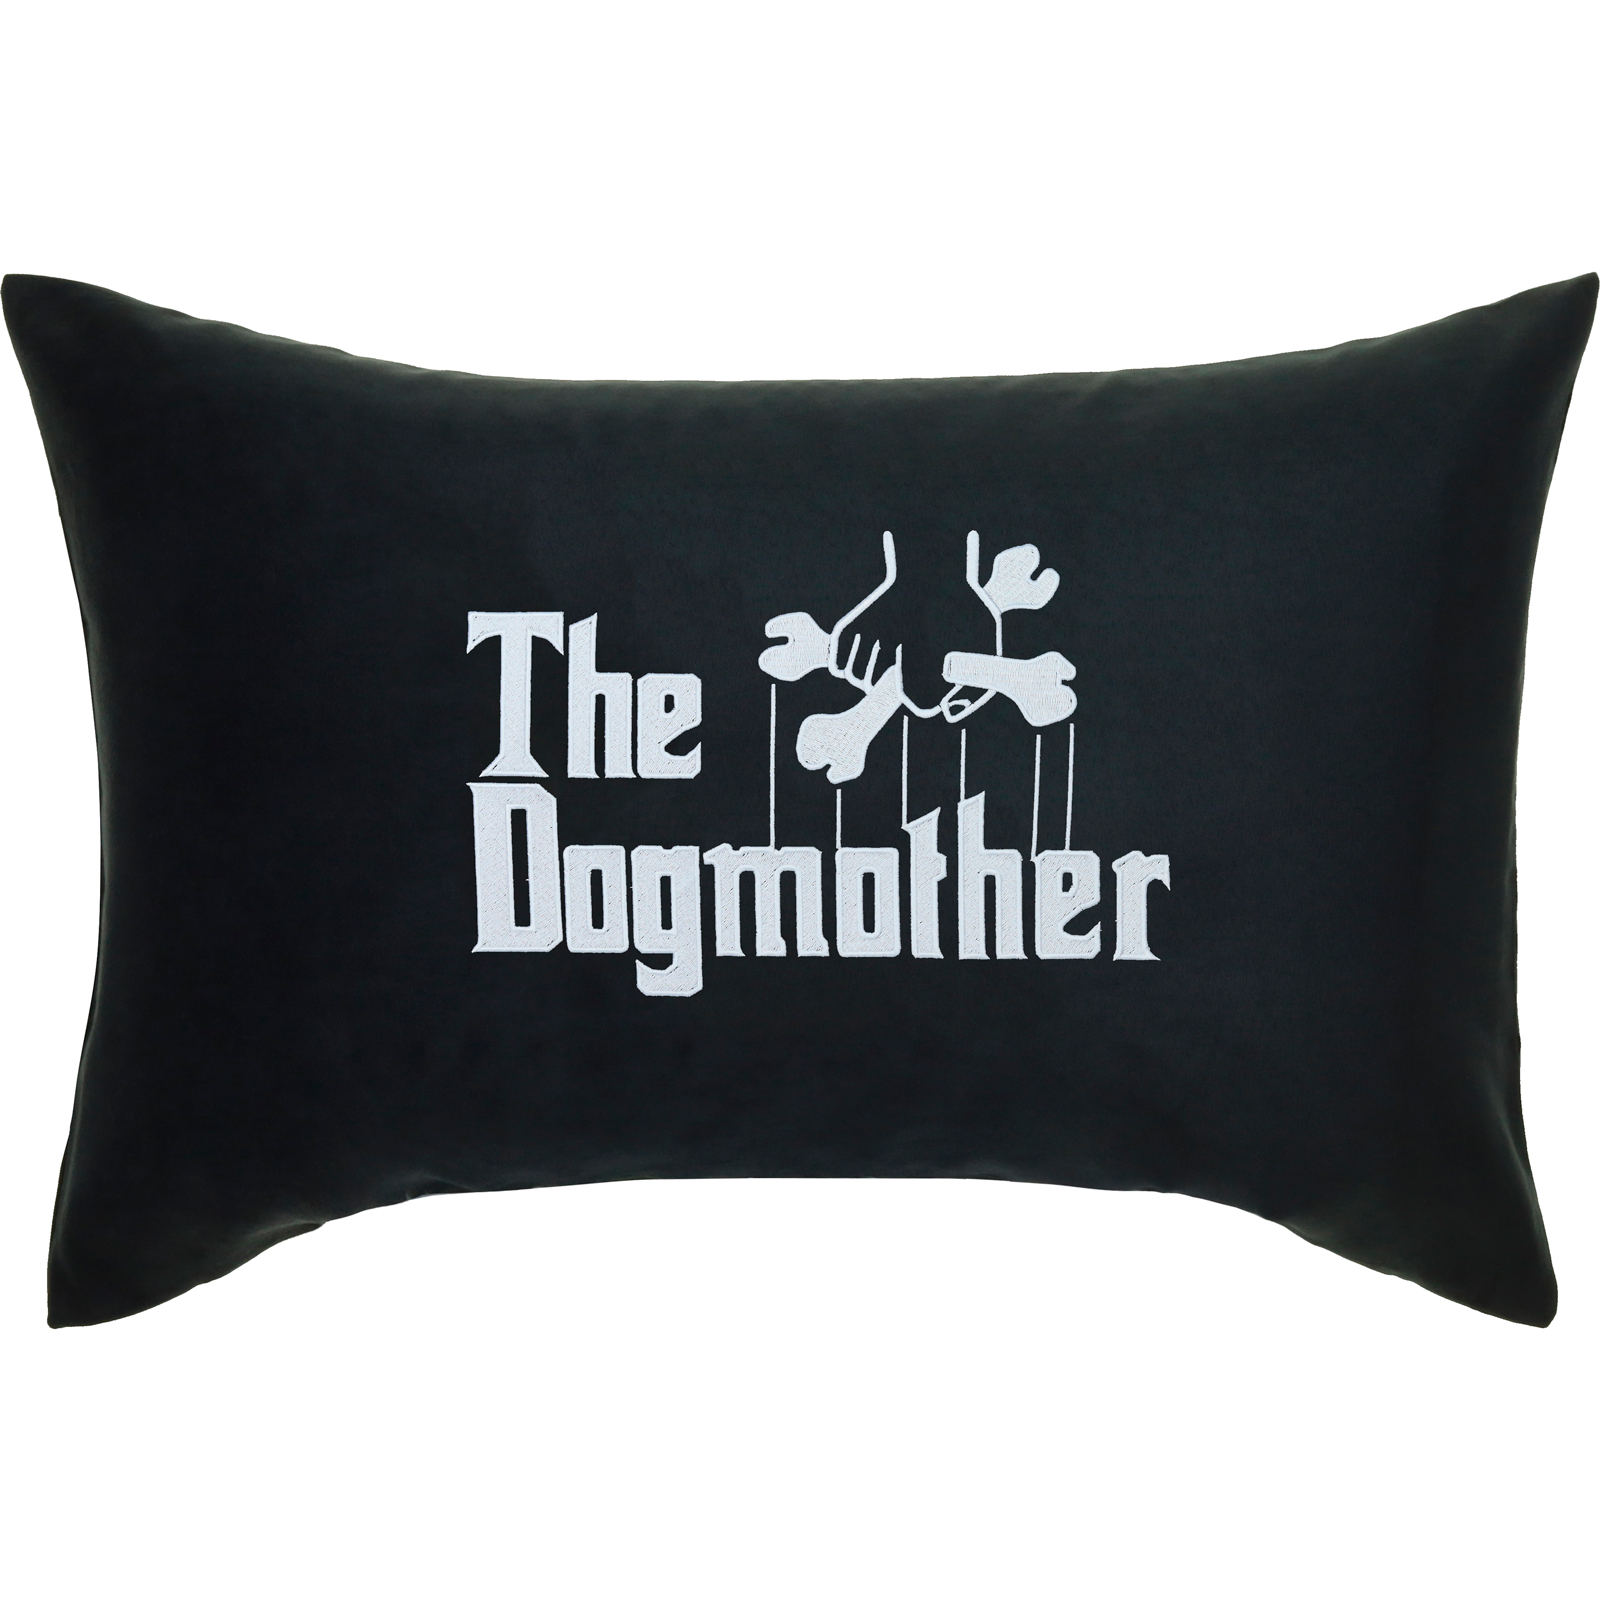 The Dogmother - Kissen